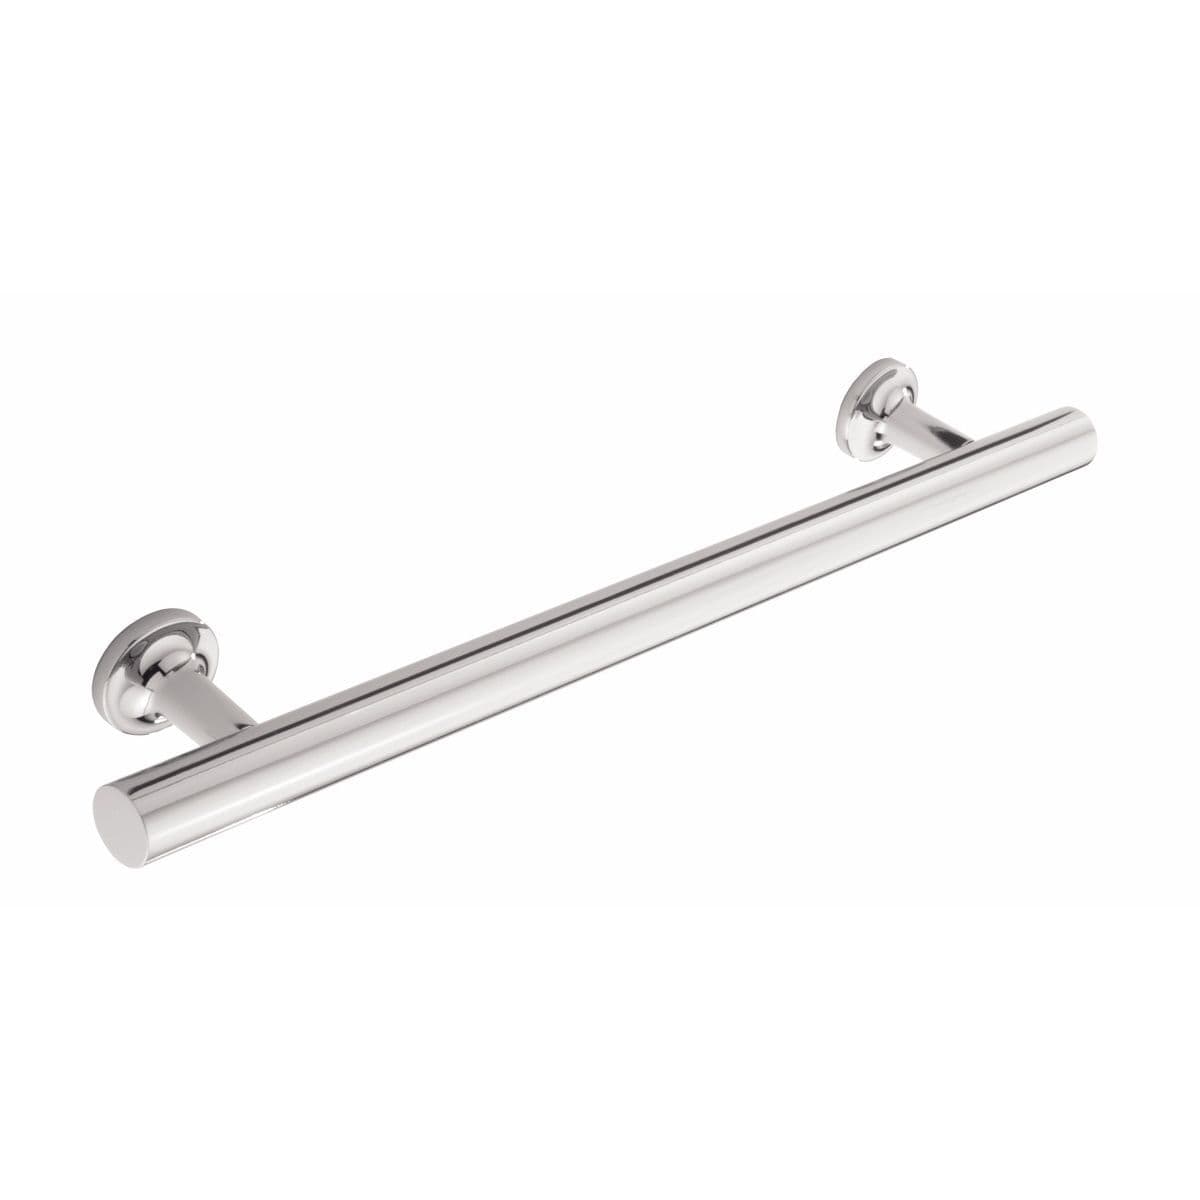 LINTON T BAR Cupboard Handle - 2 sizes - POLISHED CHROME finish (PWS H1120.160.CH / H1120.256.CH)